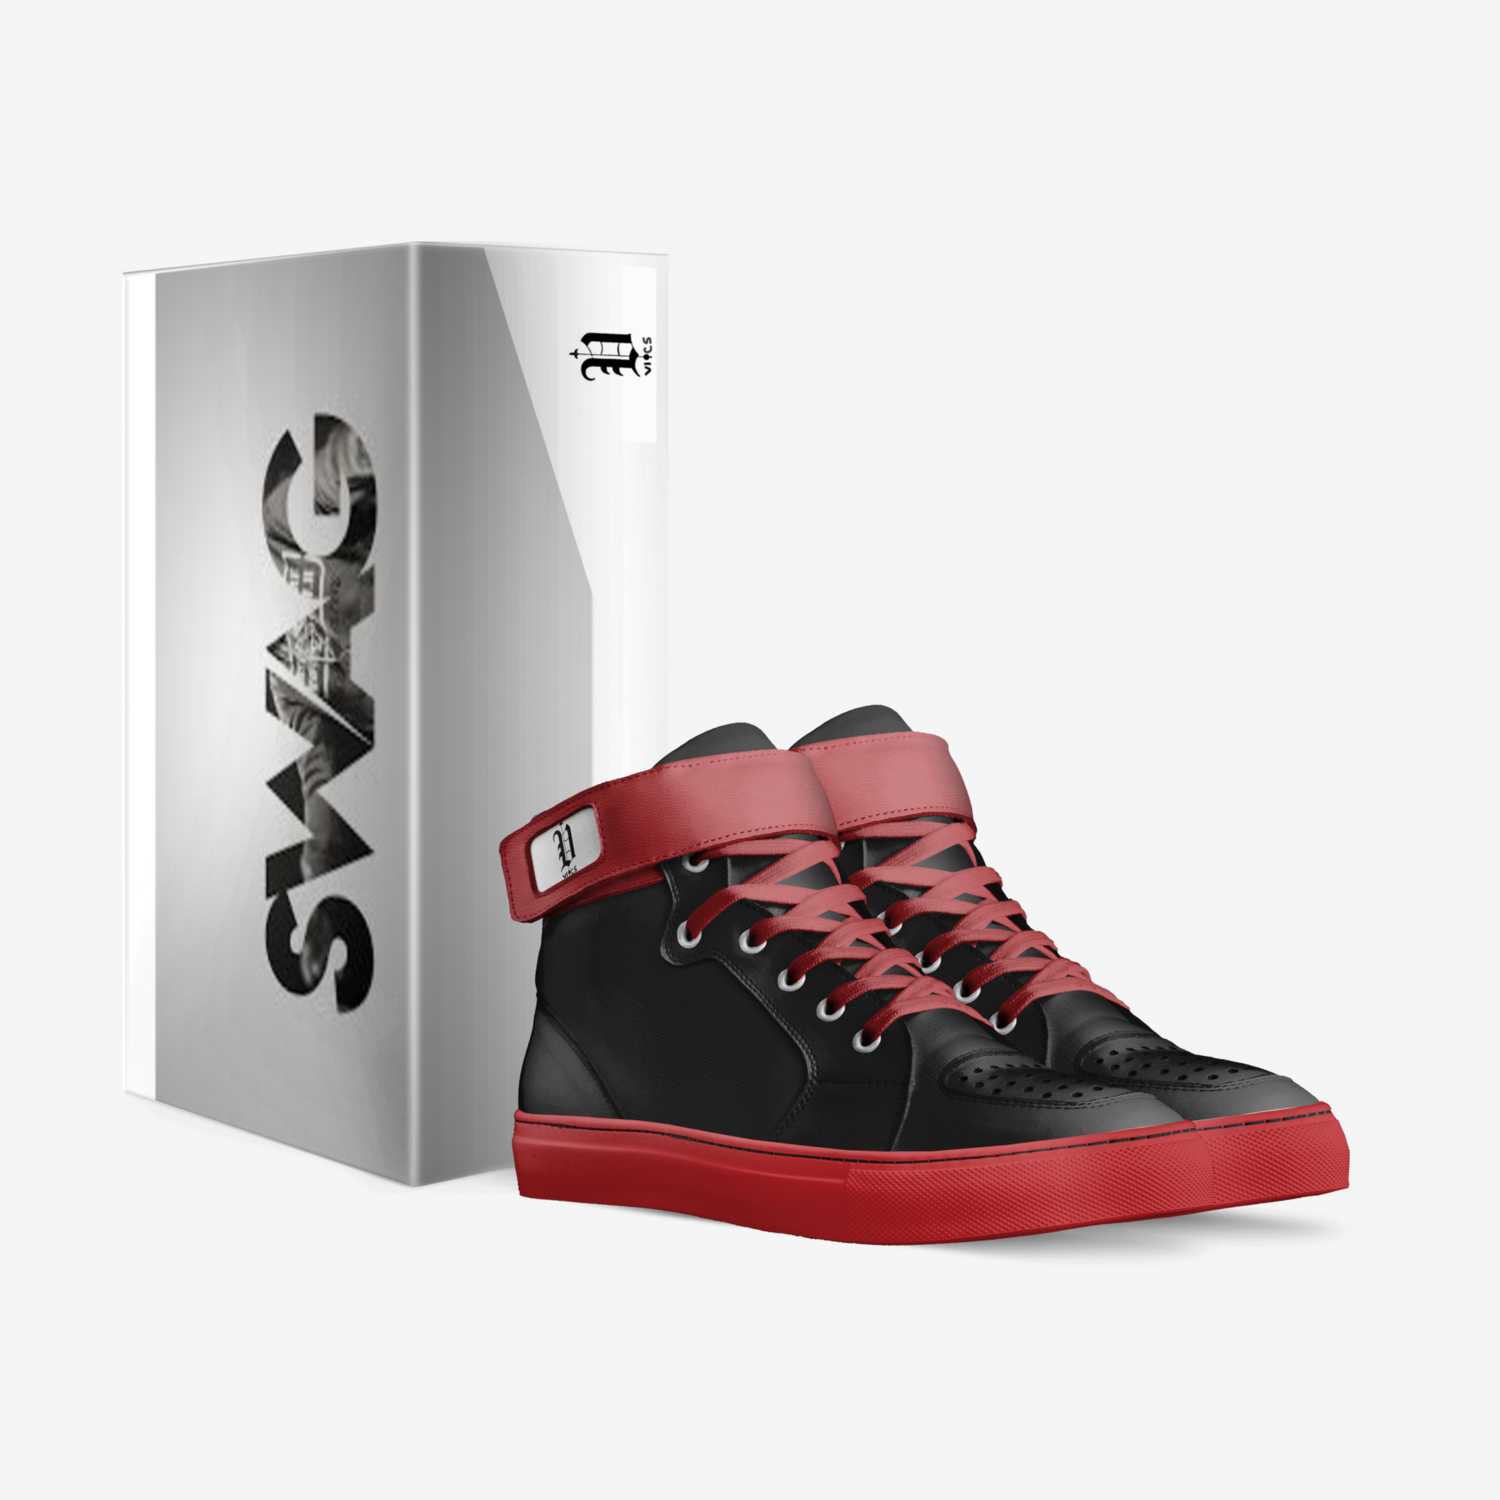 Vics swagger  custom made in Italy shoes by Brayden Murphy | Box view